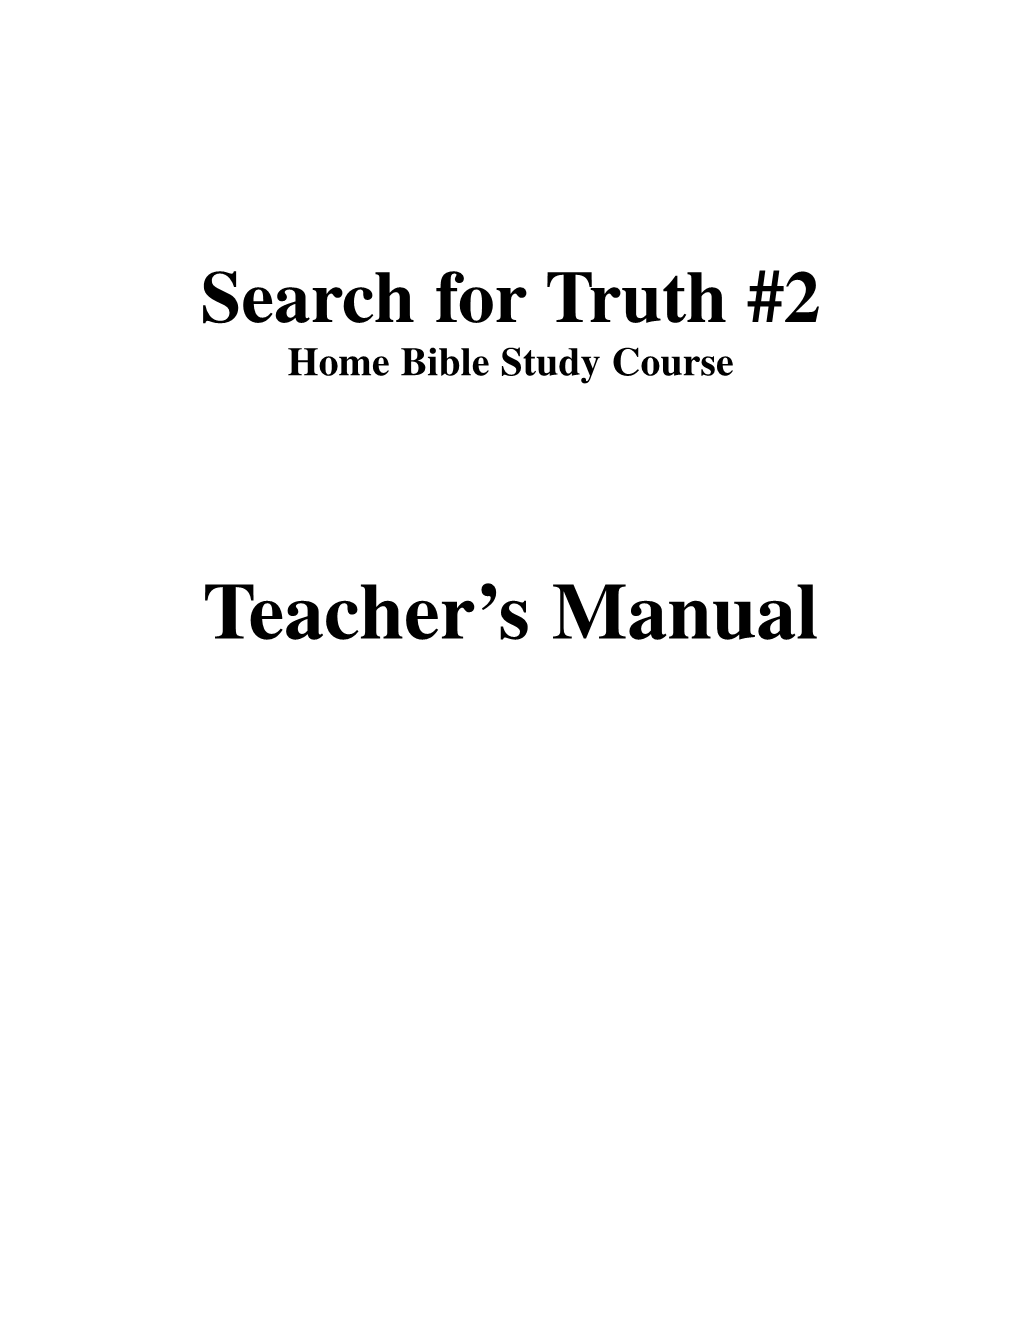 Search for Truth #2 Home Bible Study Course